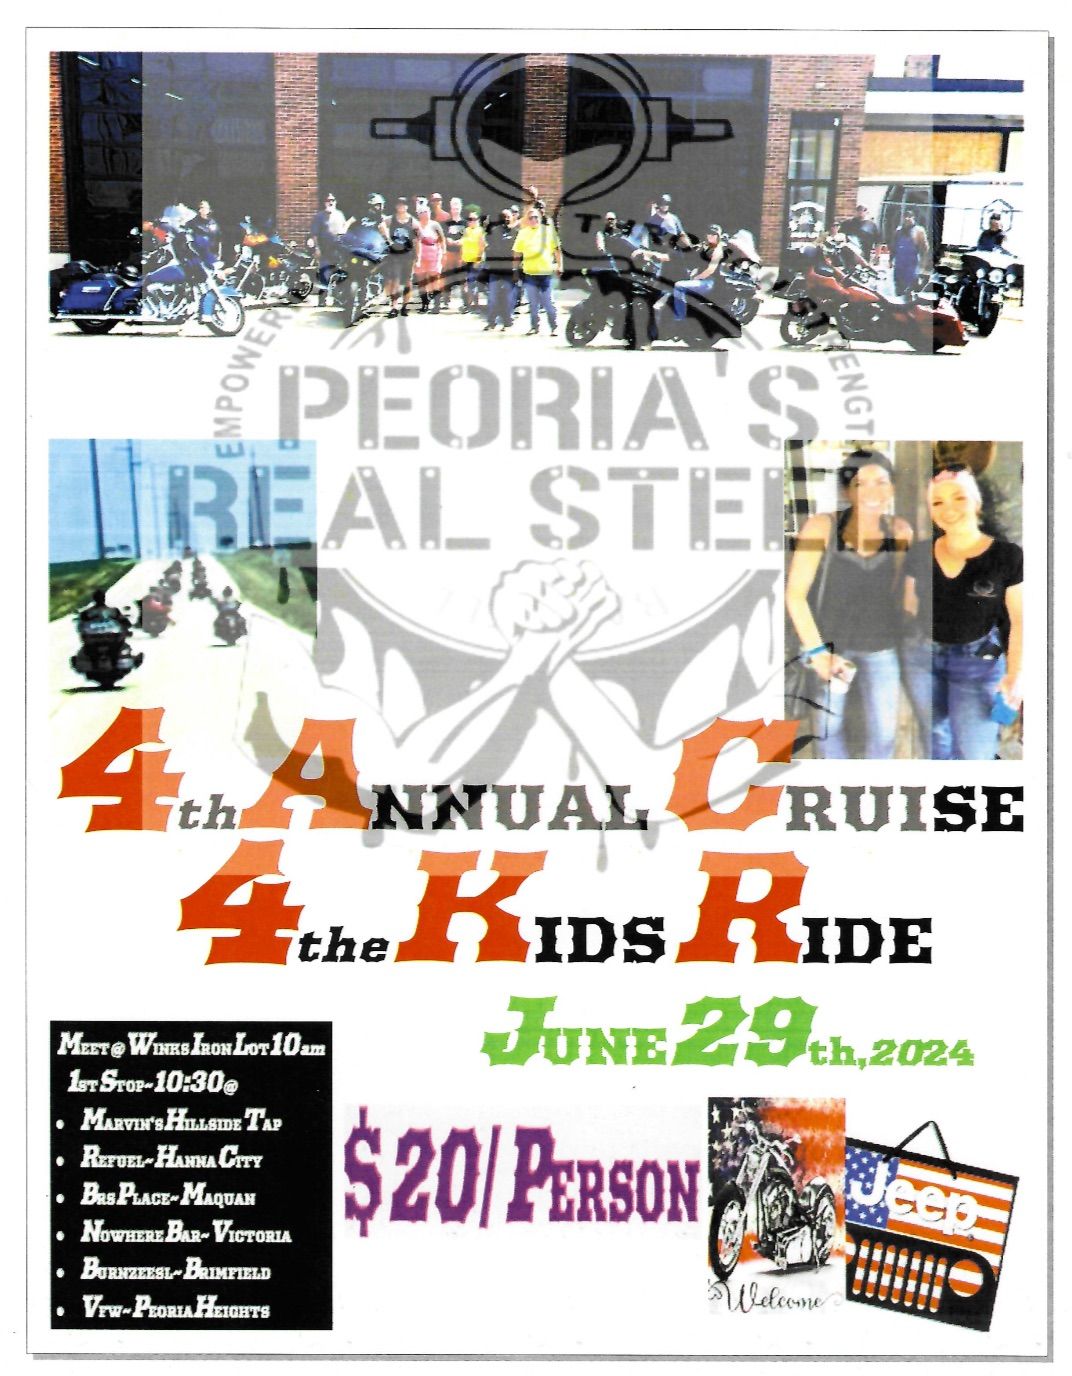 4th Annual Cruise for the Kids Ride